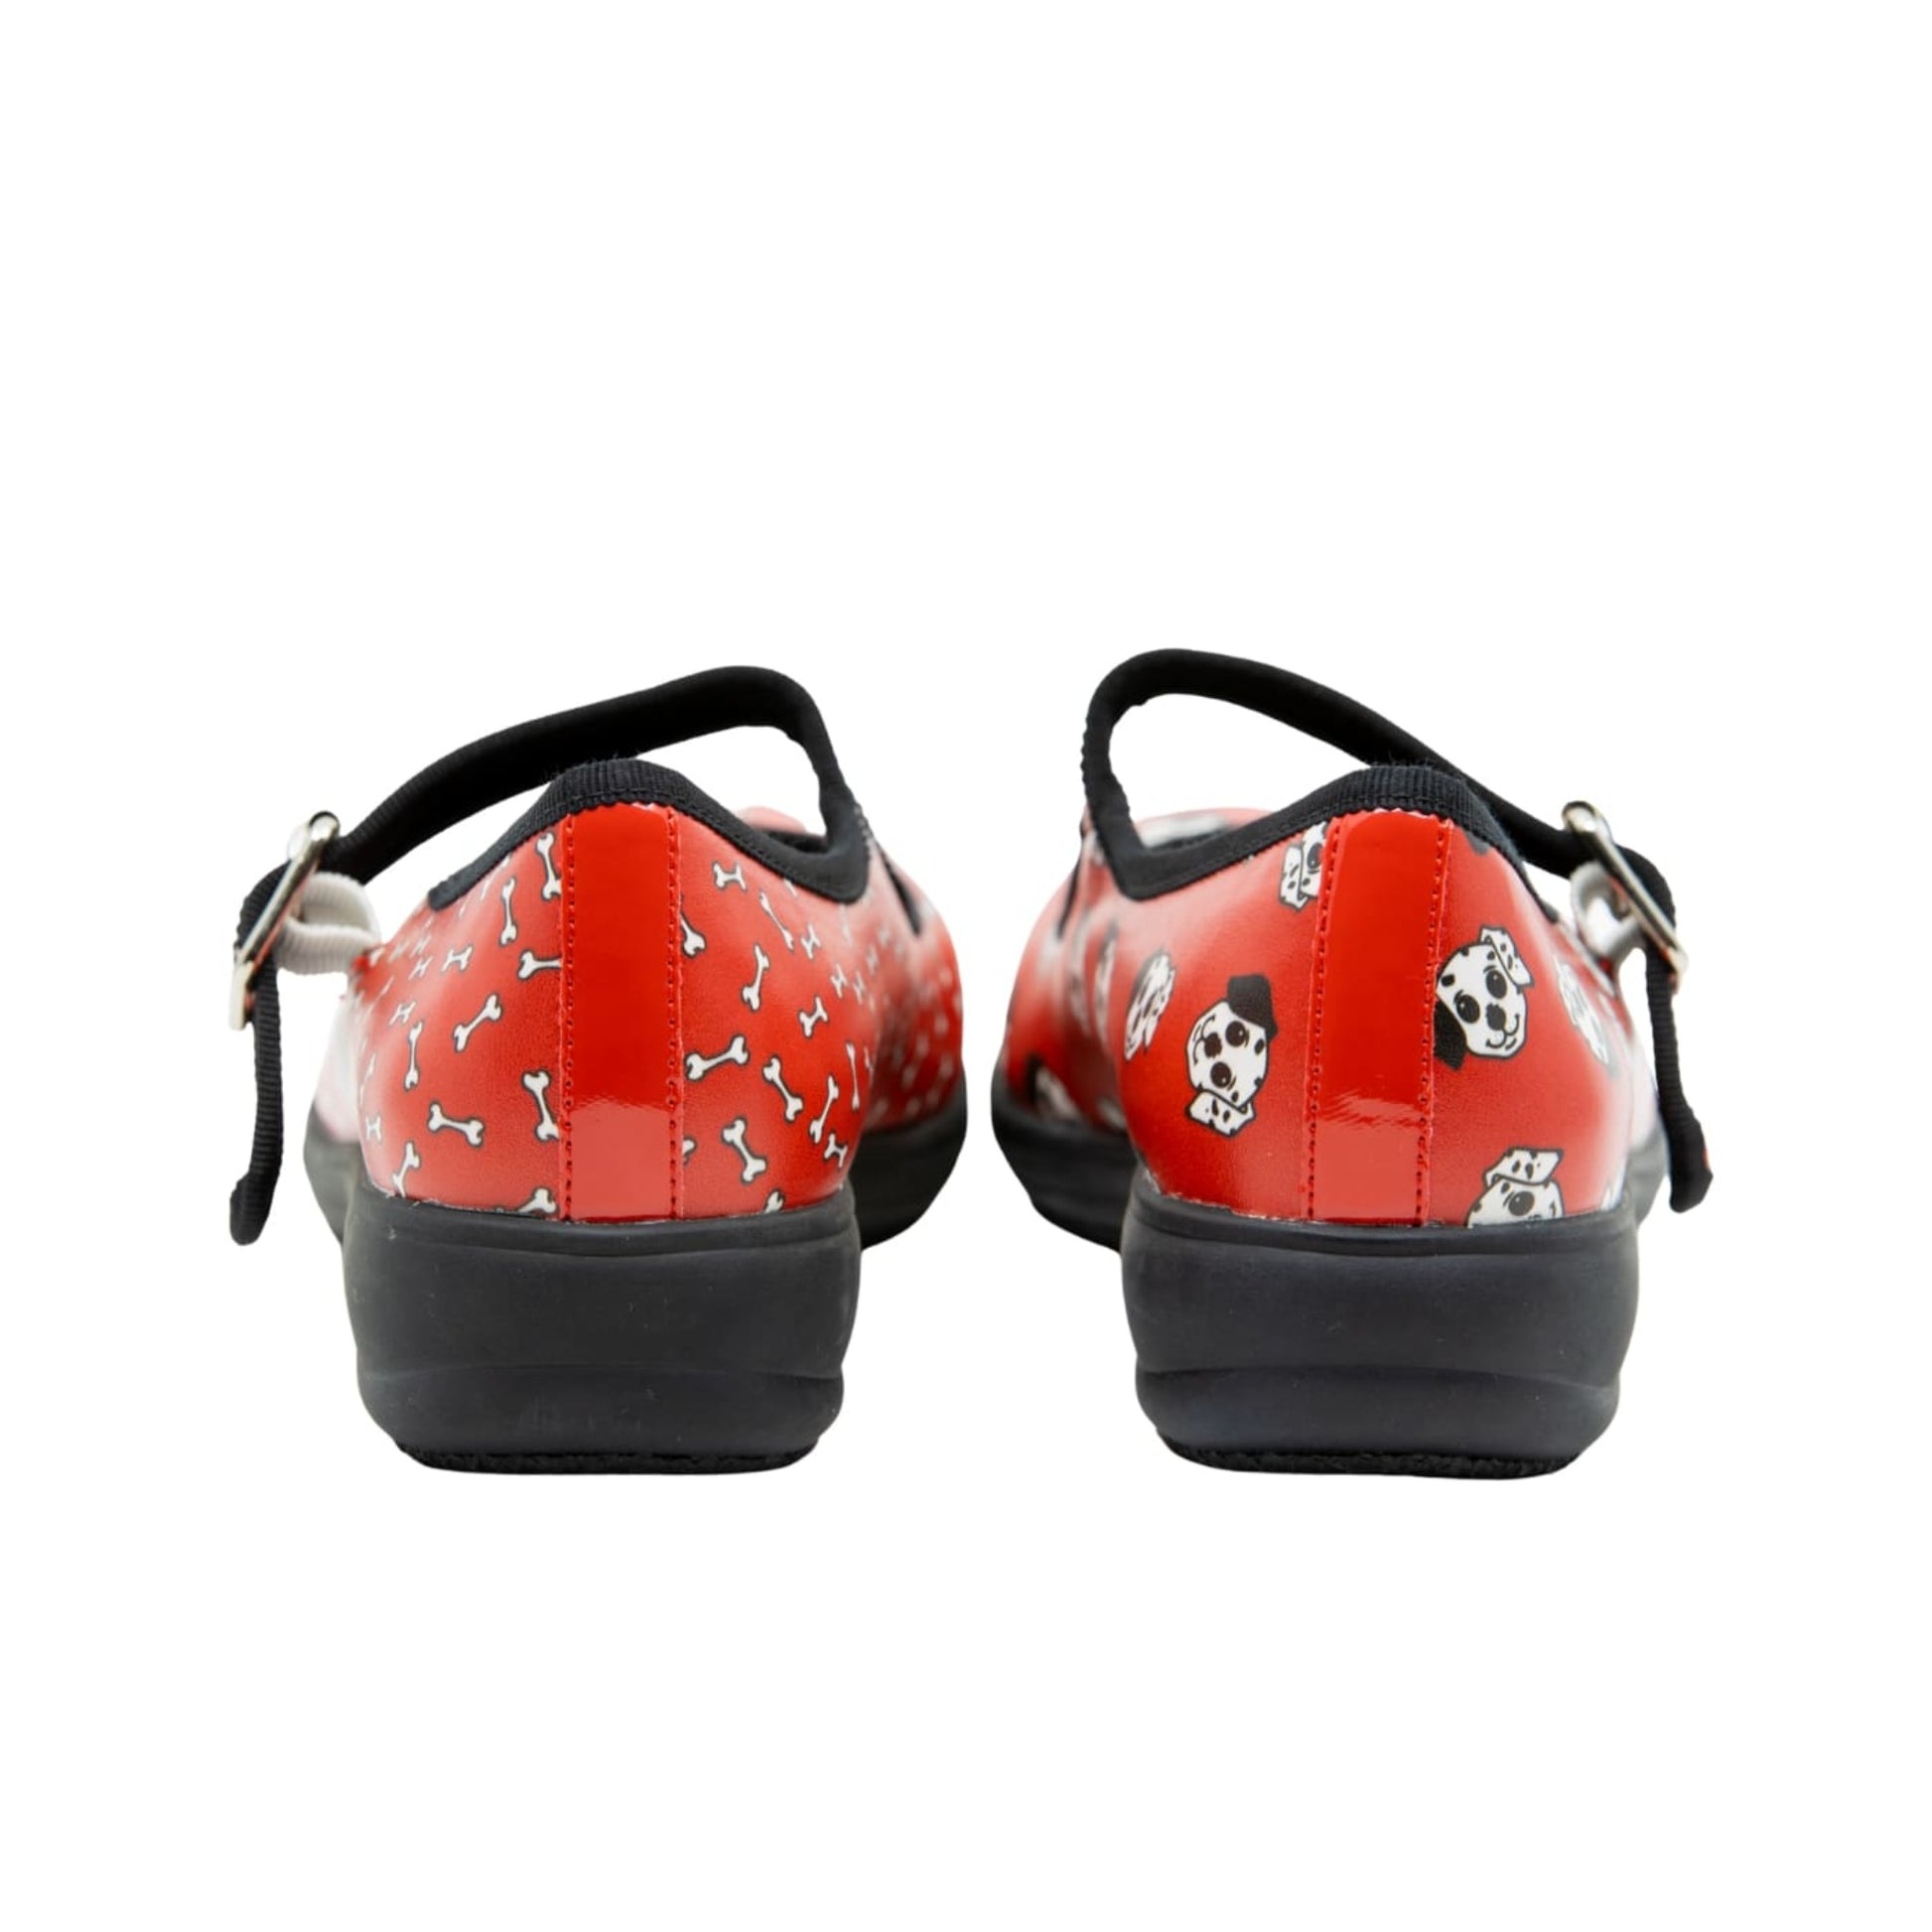 Puppy Love Mary Janes by RainbowsAndFairies.com.au (Dalmations - Dog Bones - Red & Black - Buckle Up Shoes - Mismatched Shoes - Fire Truck - Dogs) - SKU: FW_MARYJ_PUPPY_ORG - Pic-05